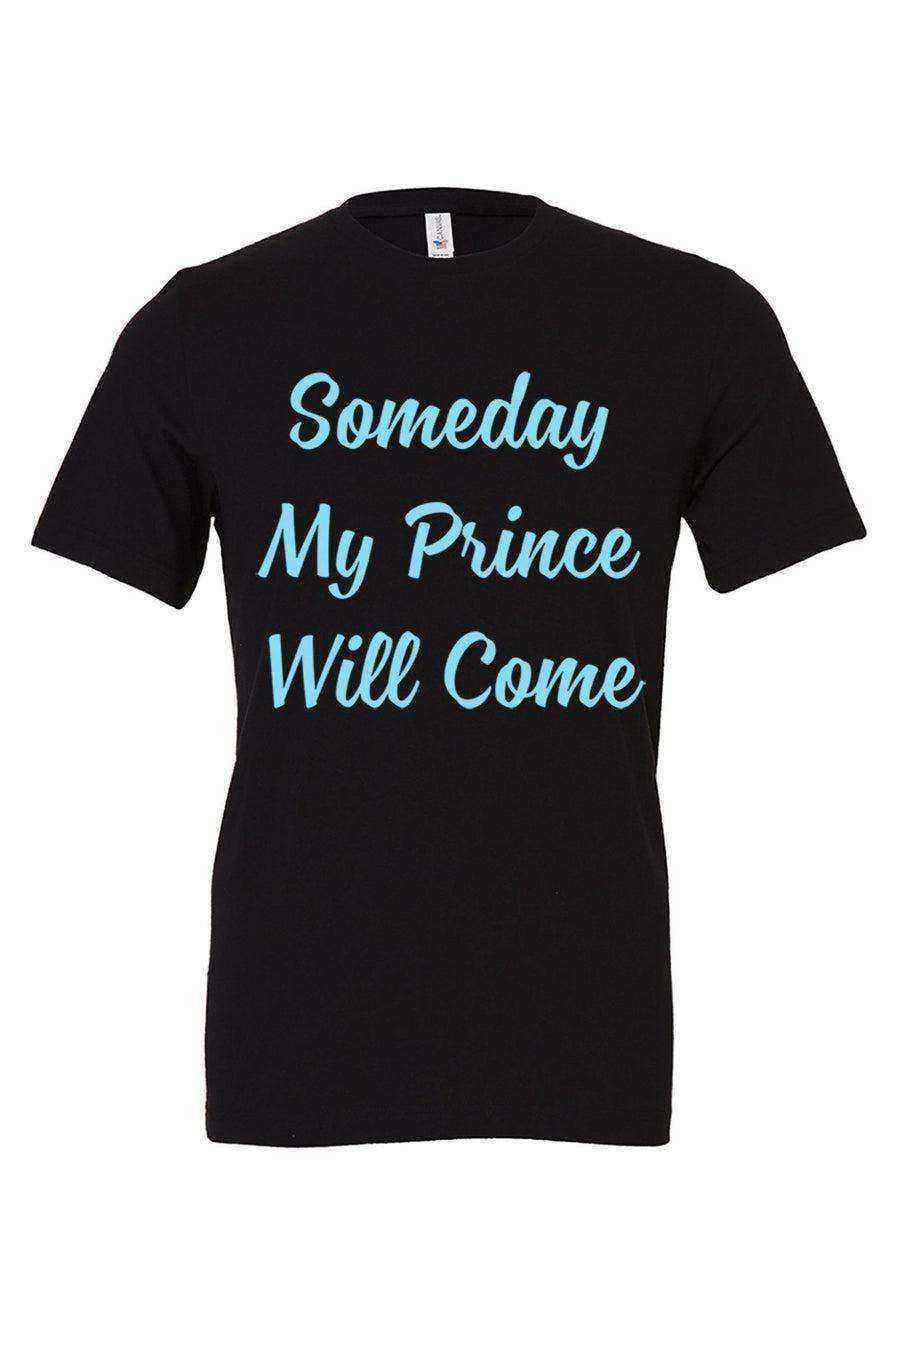 Some Day My Prince Will Come Tee - Dylan's Tees